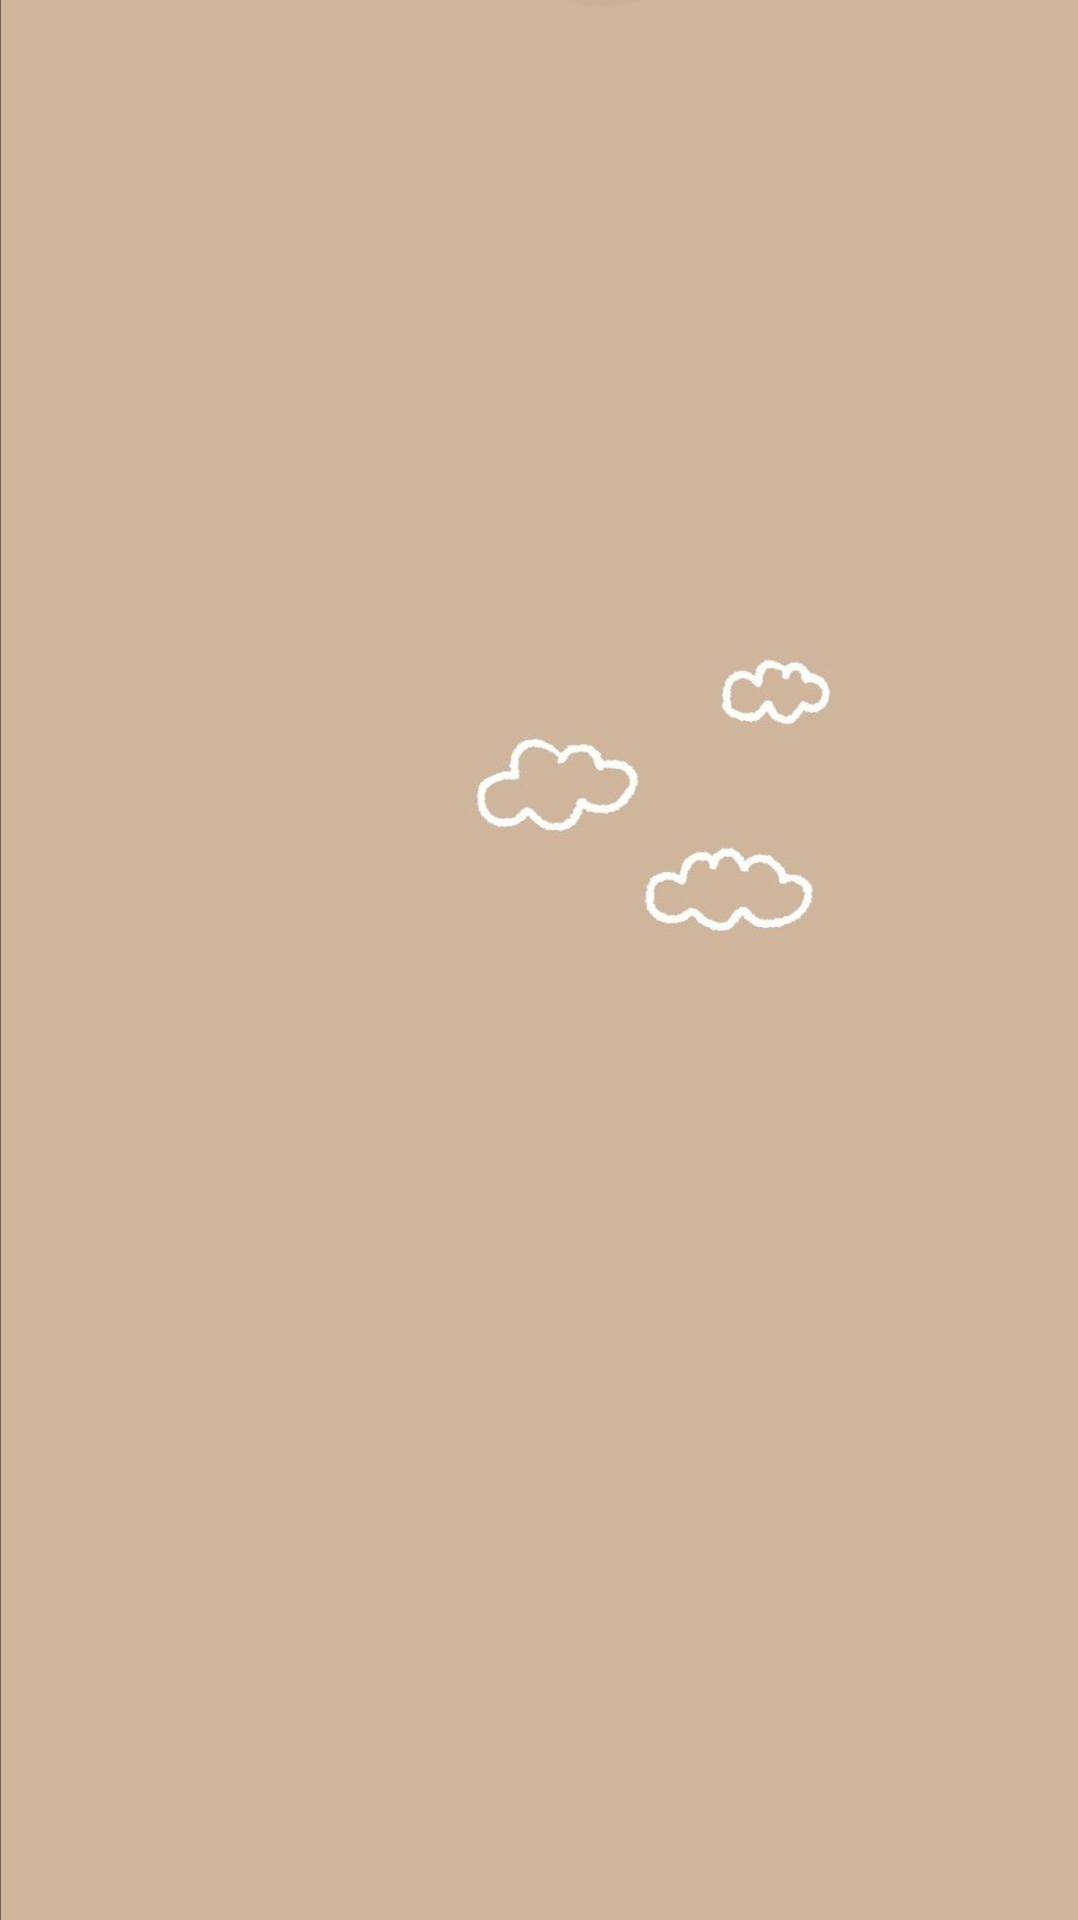 Aesthetic Clouds On Beige Background